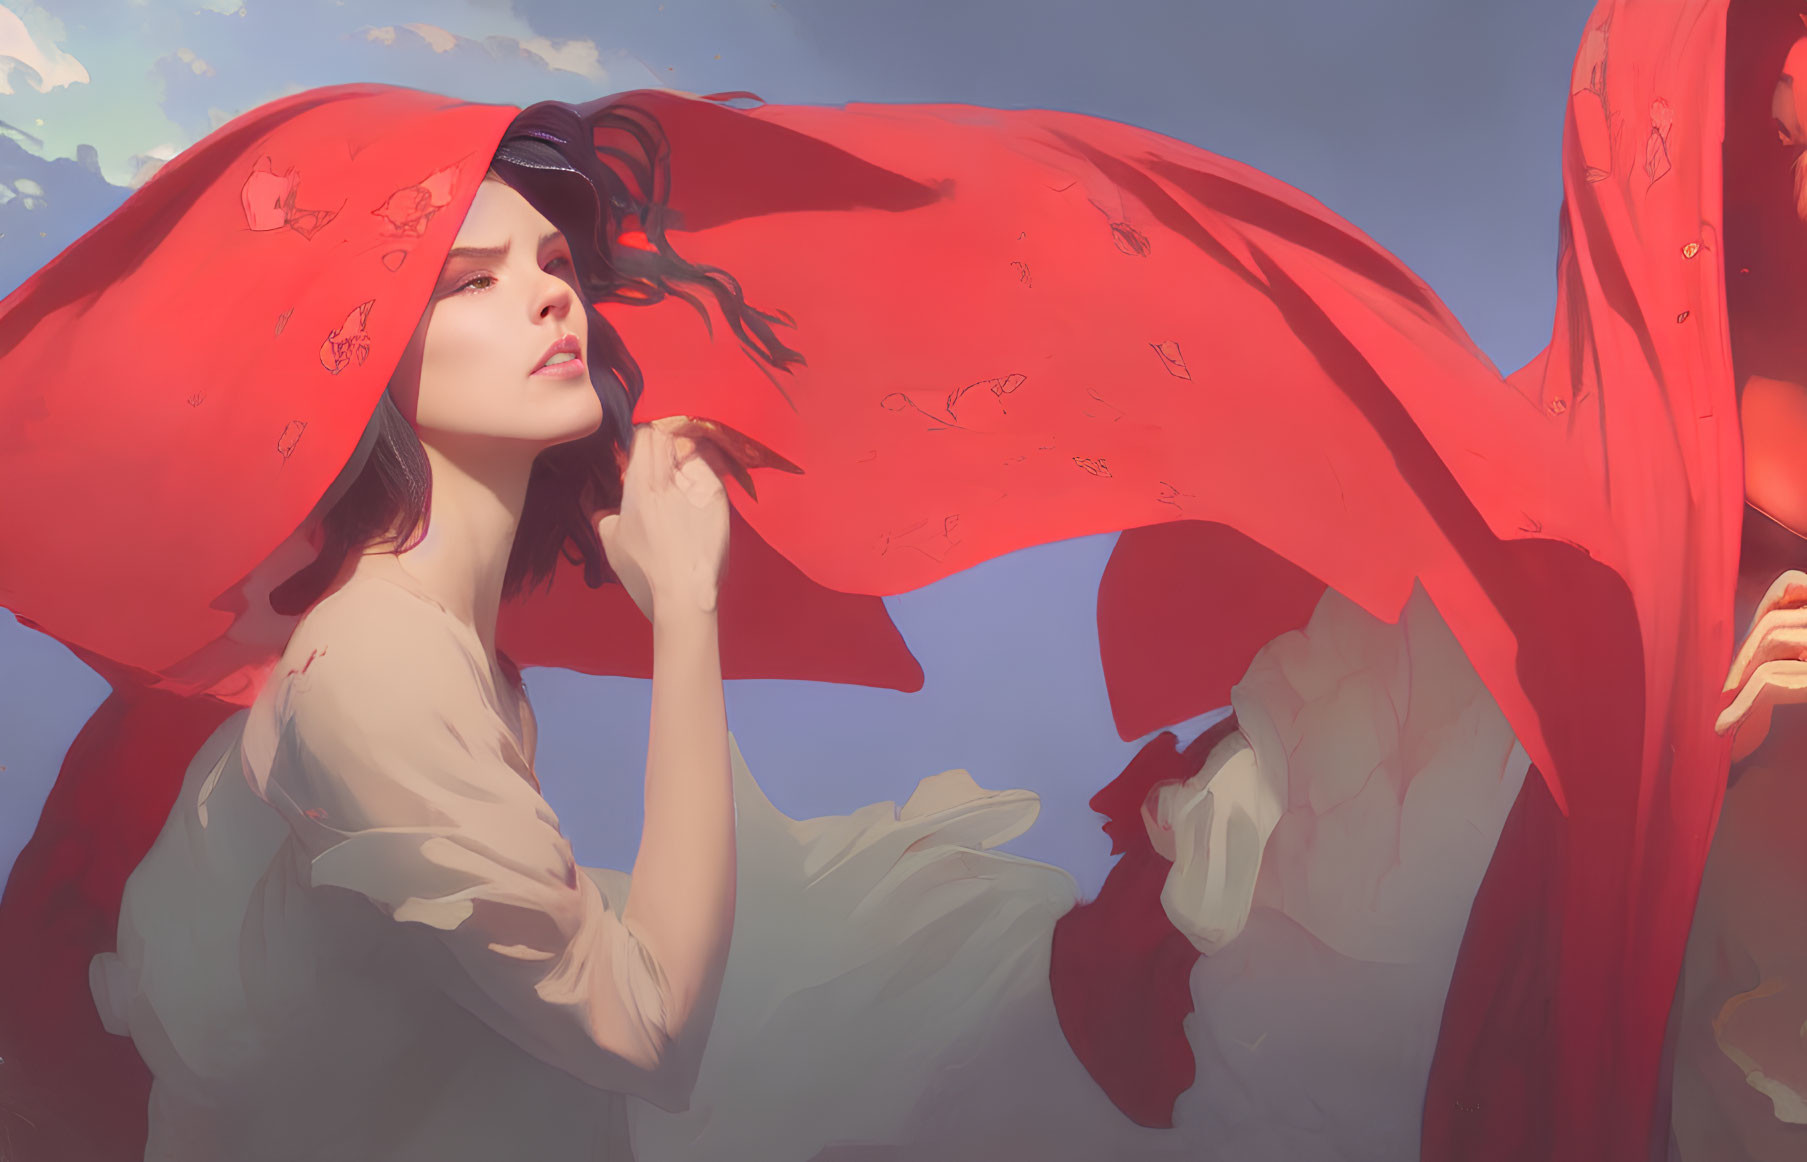 Woman with Large Flowing Red Scarf Against Sky Backdrop